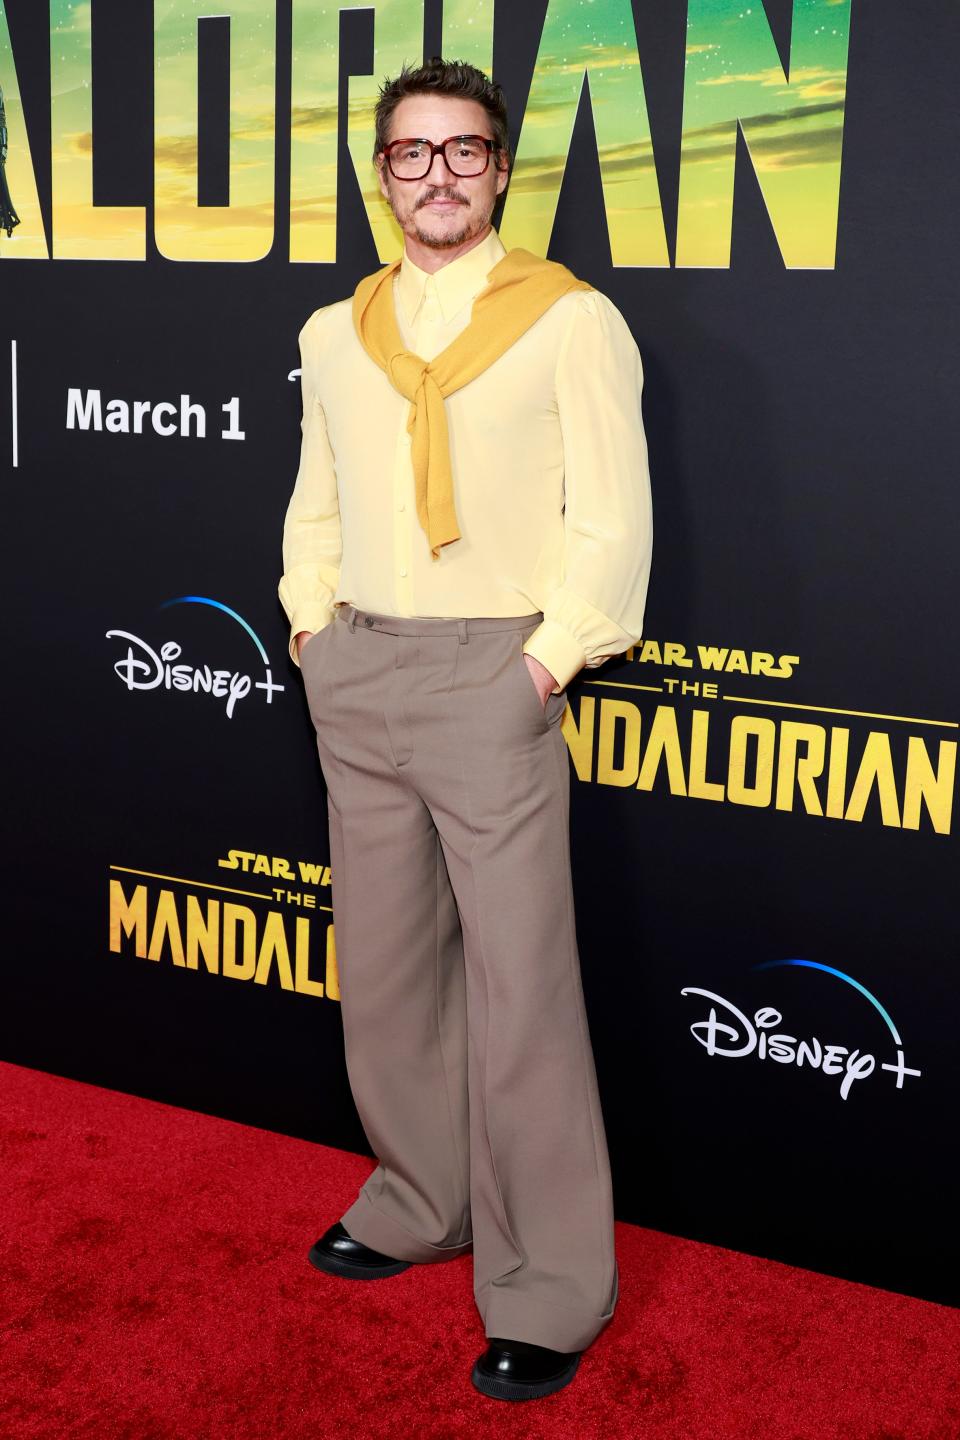 Pedro Pascal at the Los Angeles premiere of The Mandalorian in February.